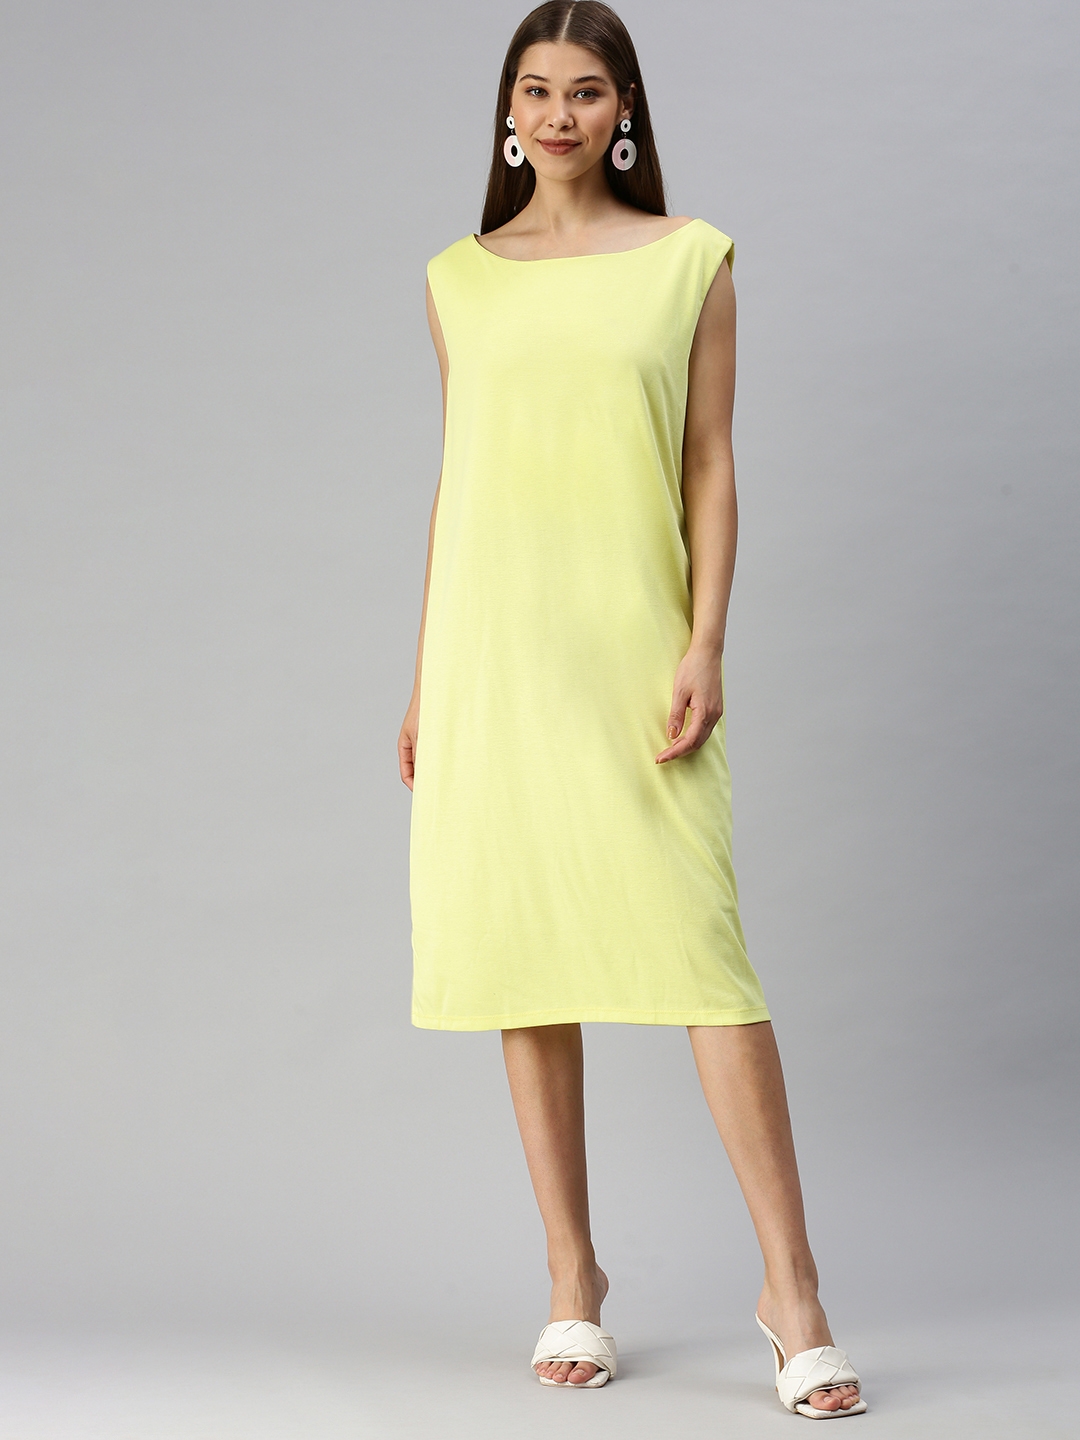 Showoff | SHOWOFF Women Yellow Solid Round Neck Sleeveless Knee length T-shirt Dress 1